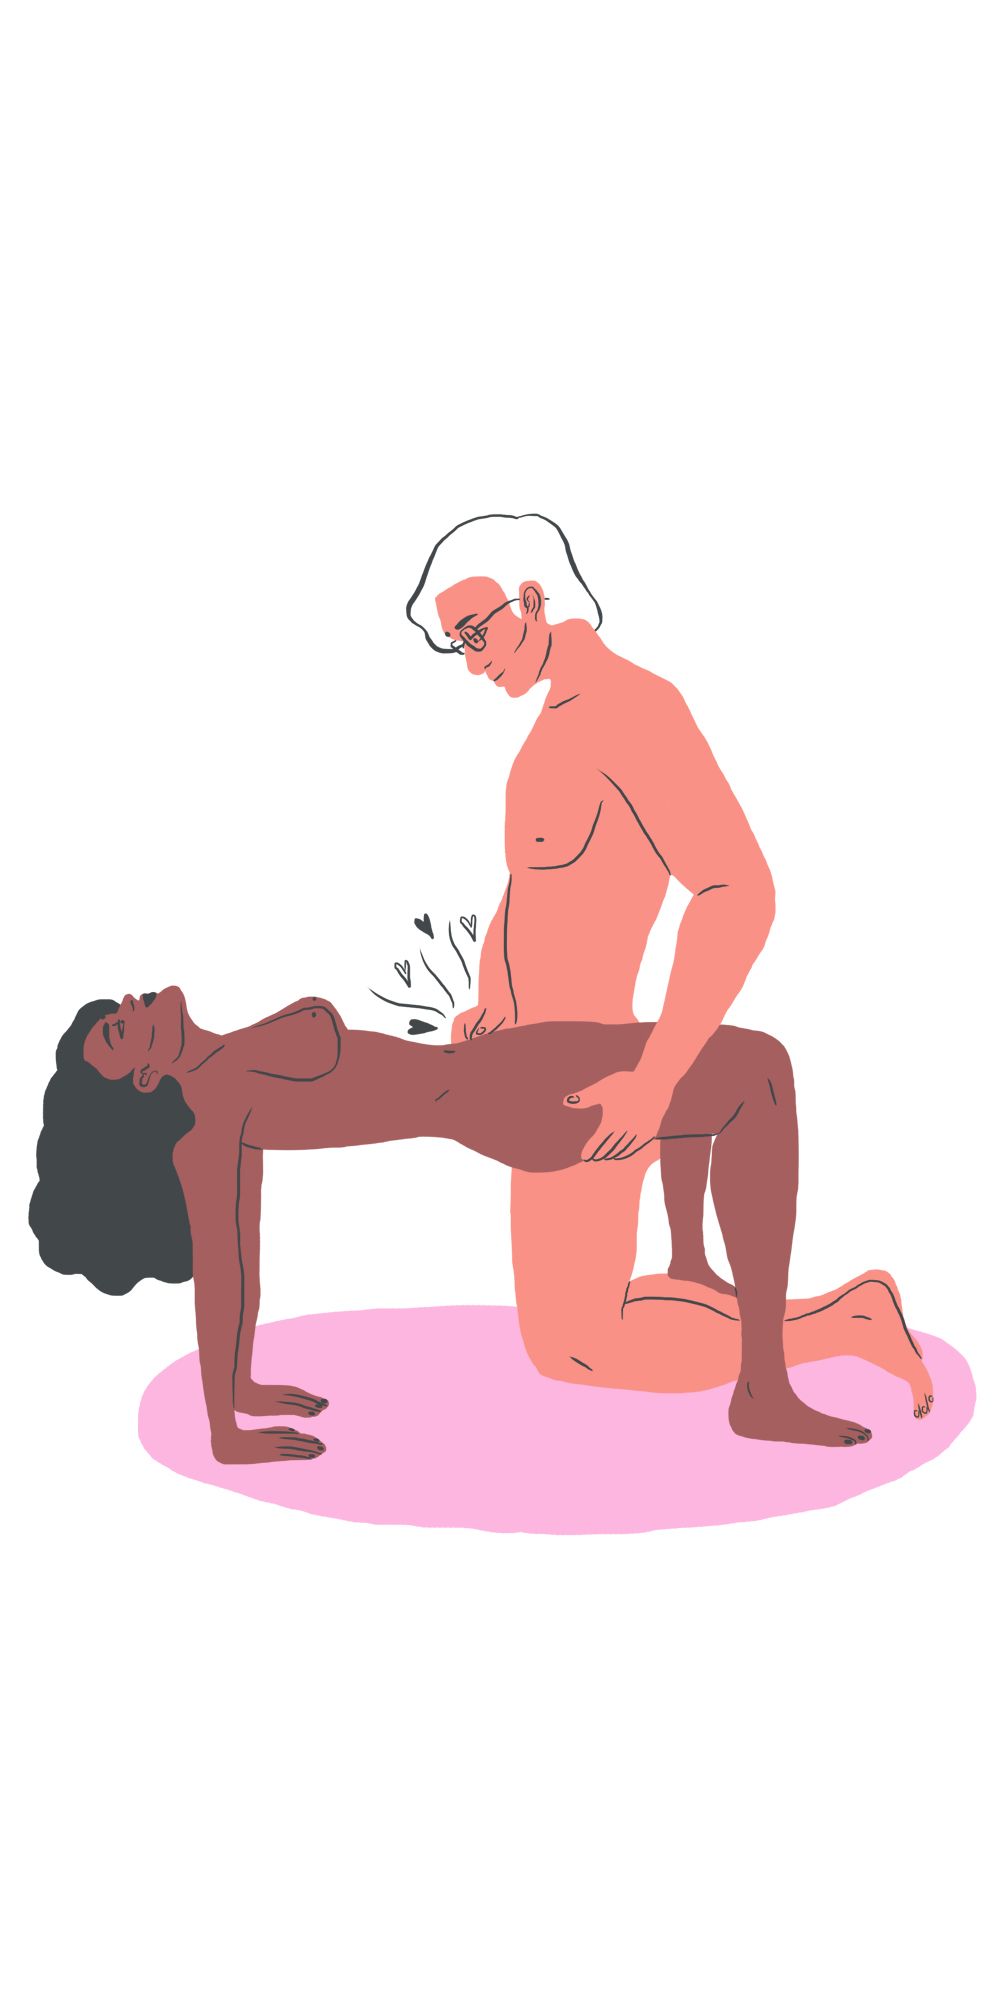 married couple sex positions